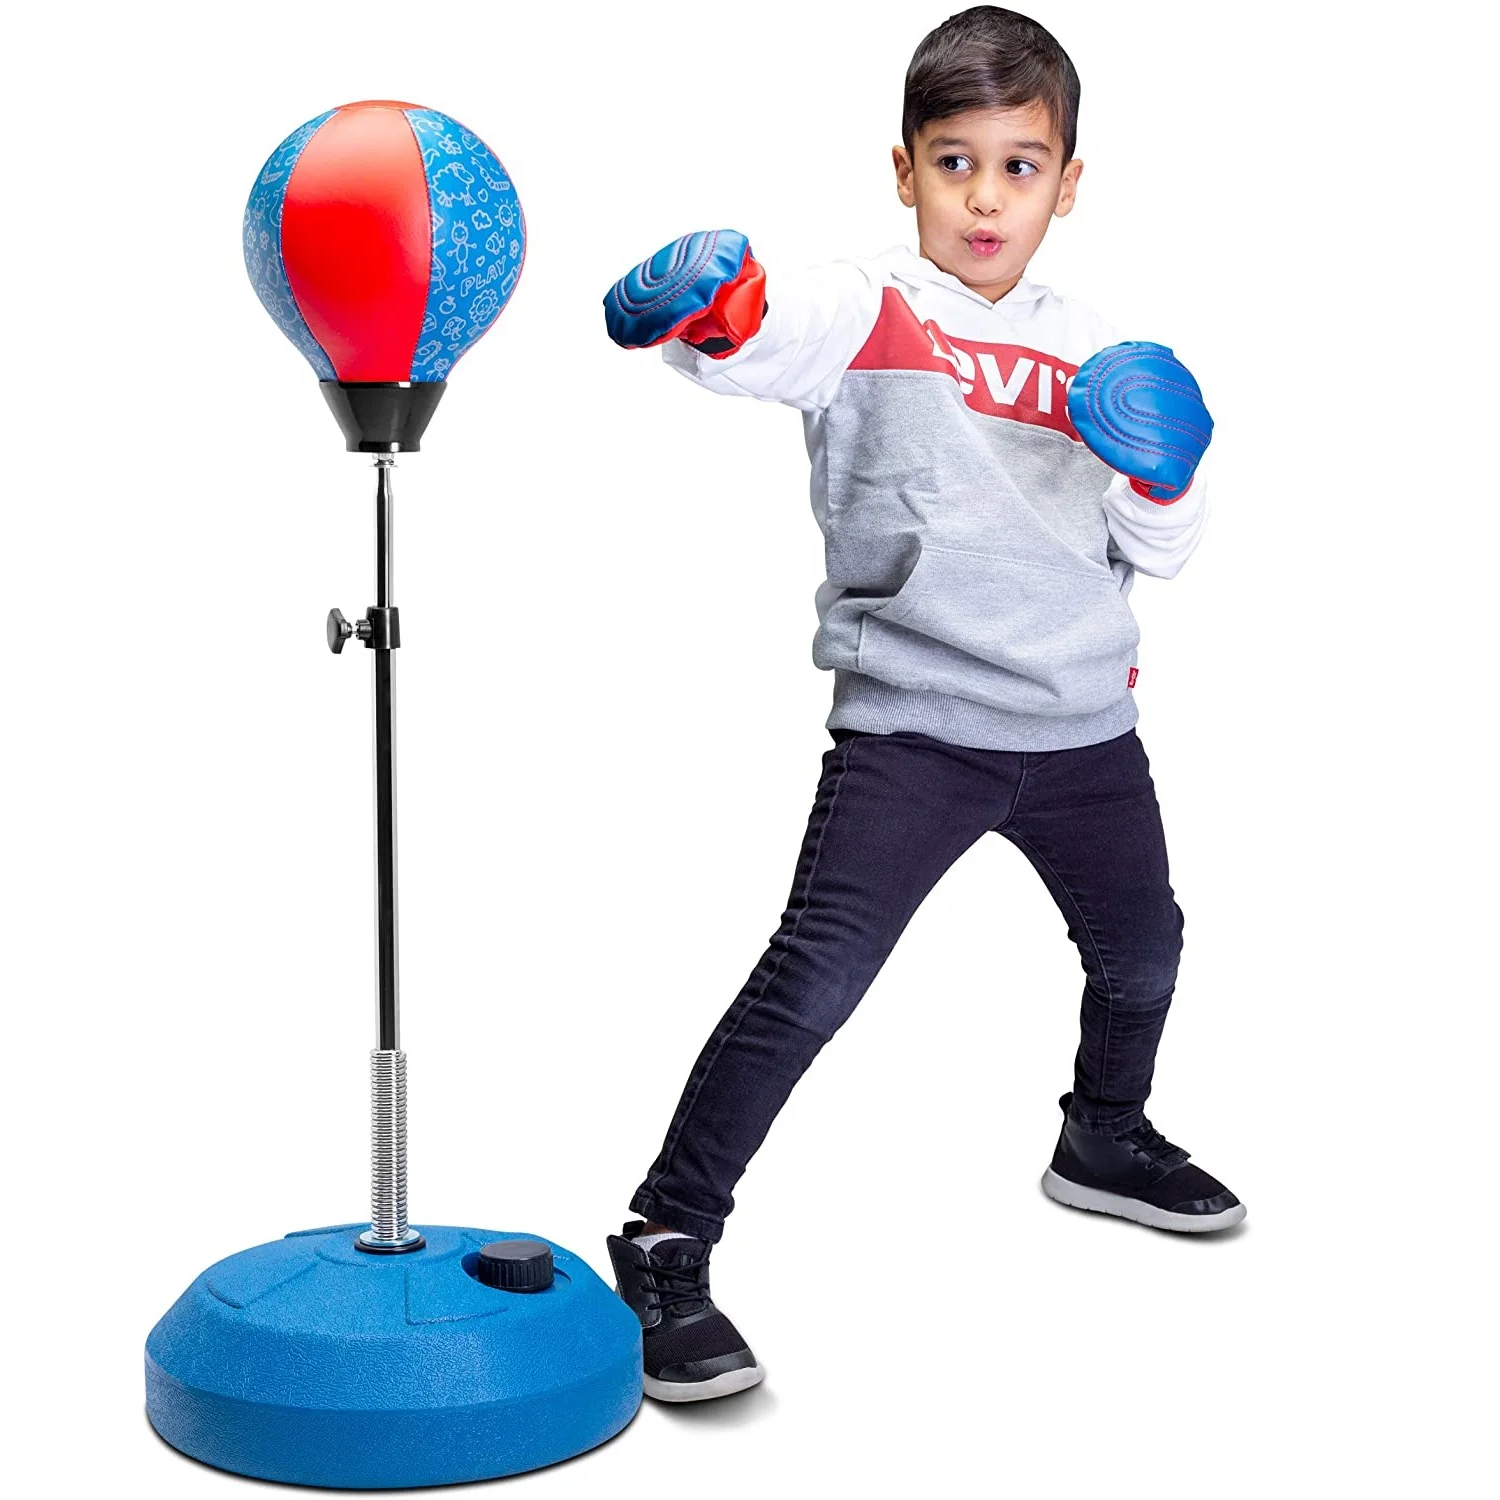 

Kids Punching Bag Reflex Boxing Bag with Stand- Set Includes Boxing Gloves- Height Adjustable for Boys Girls Ages 3-8 Years Old